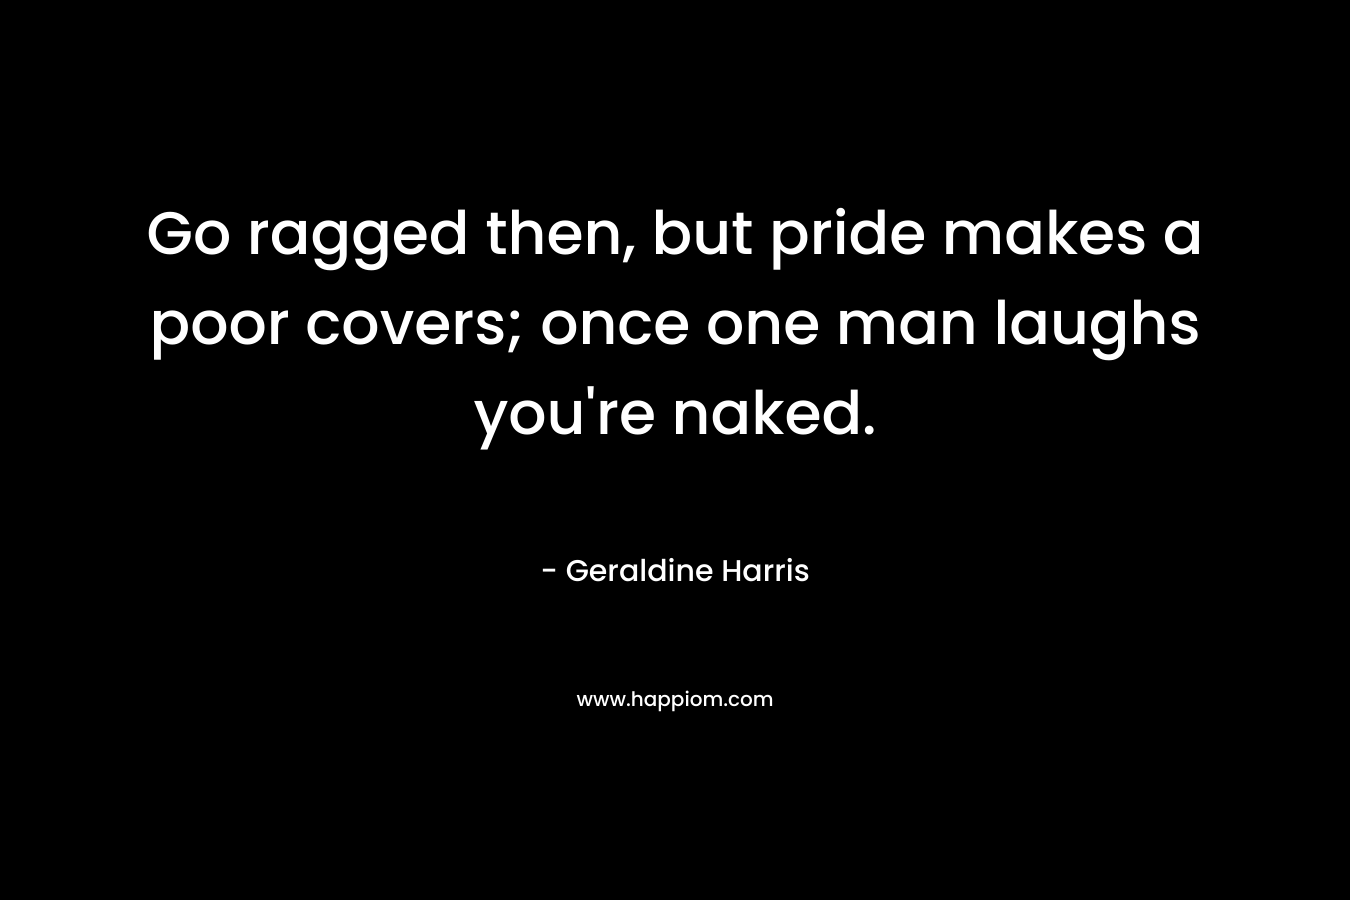 Go ragged then, but pride makes a poor covers; once one man laughs you’re naked. – Geraldine Harris